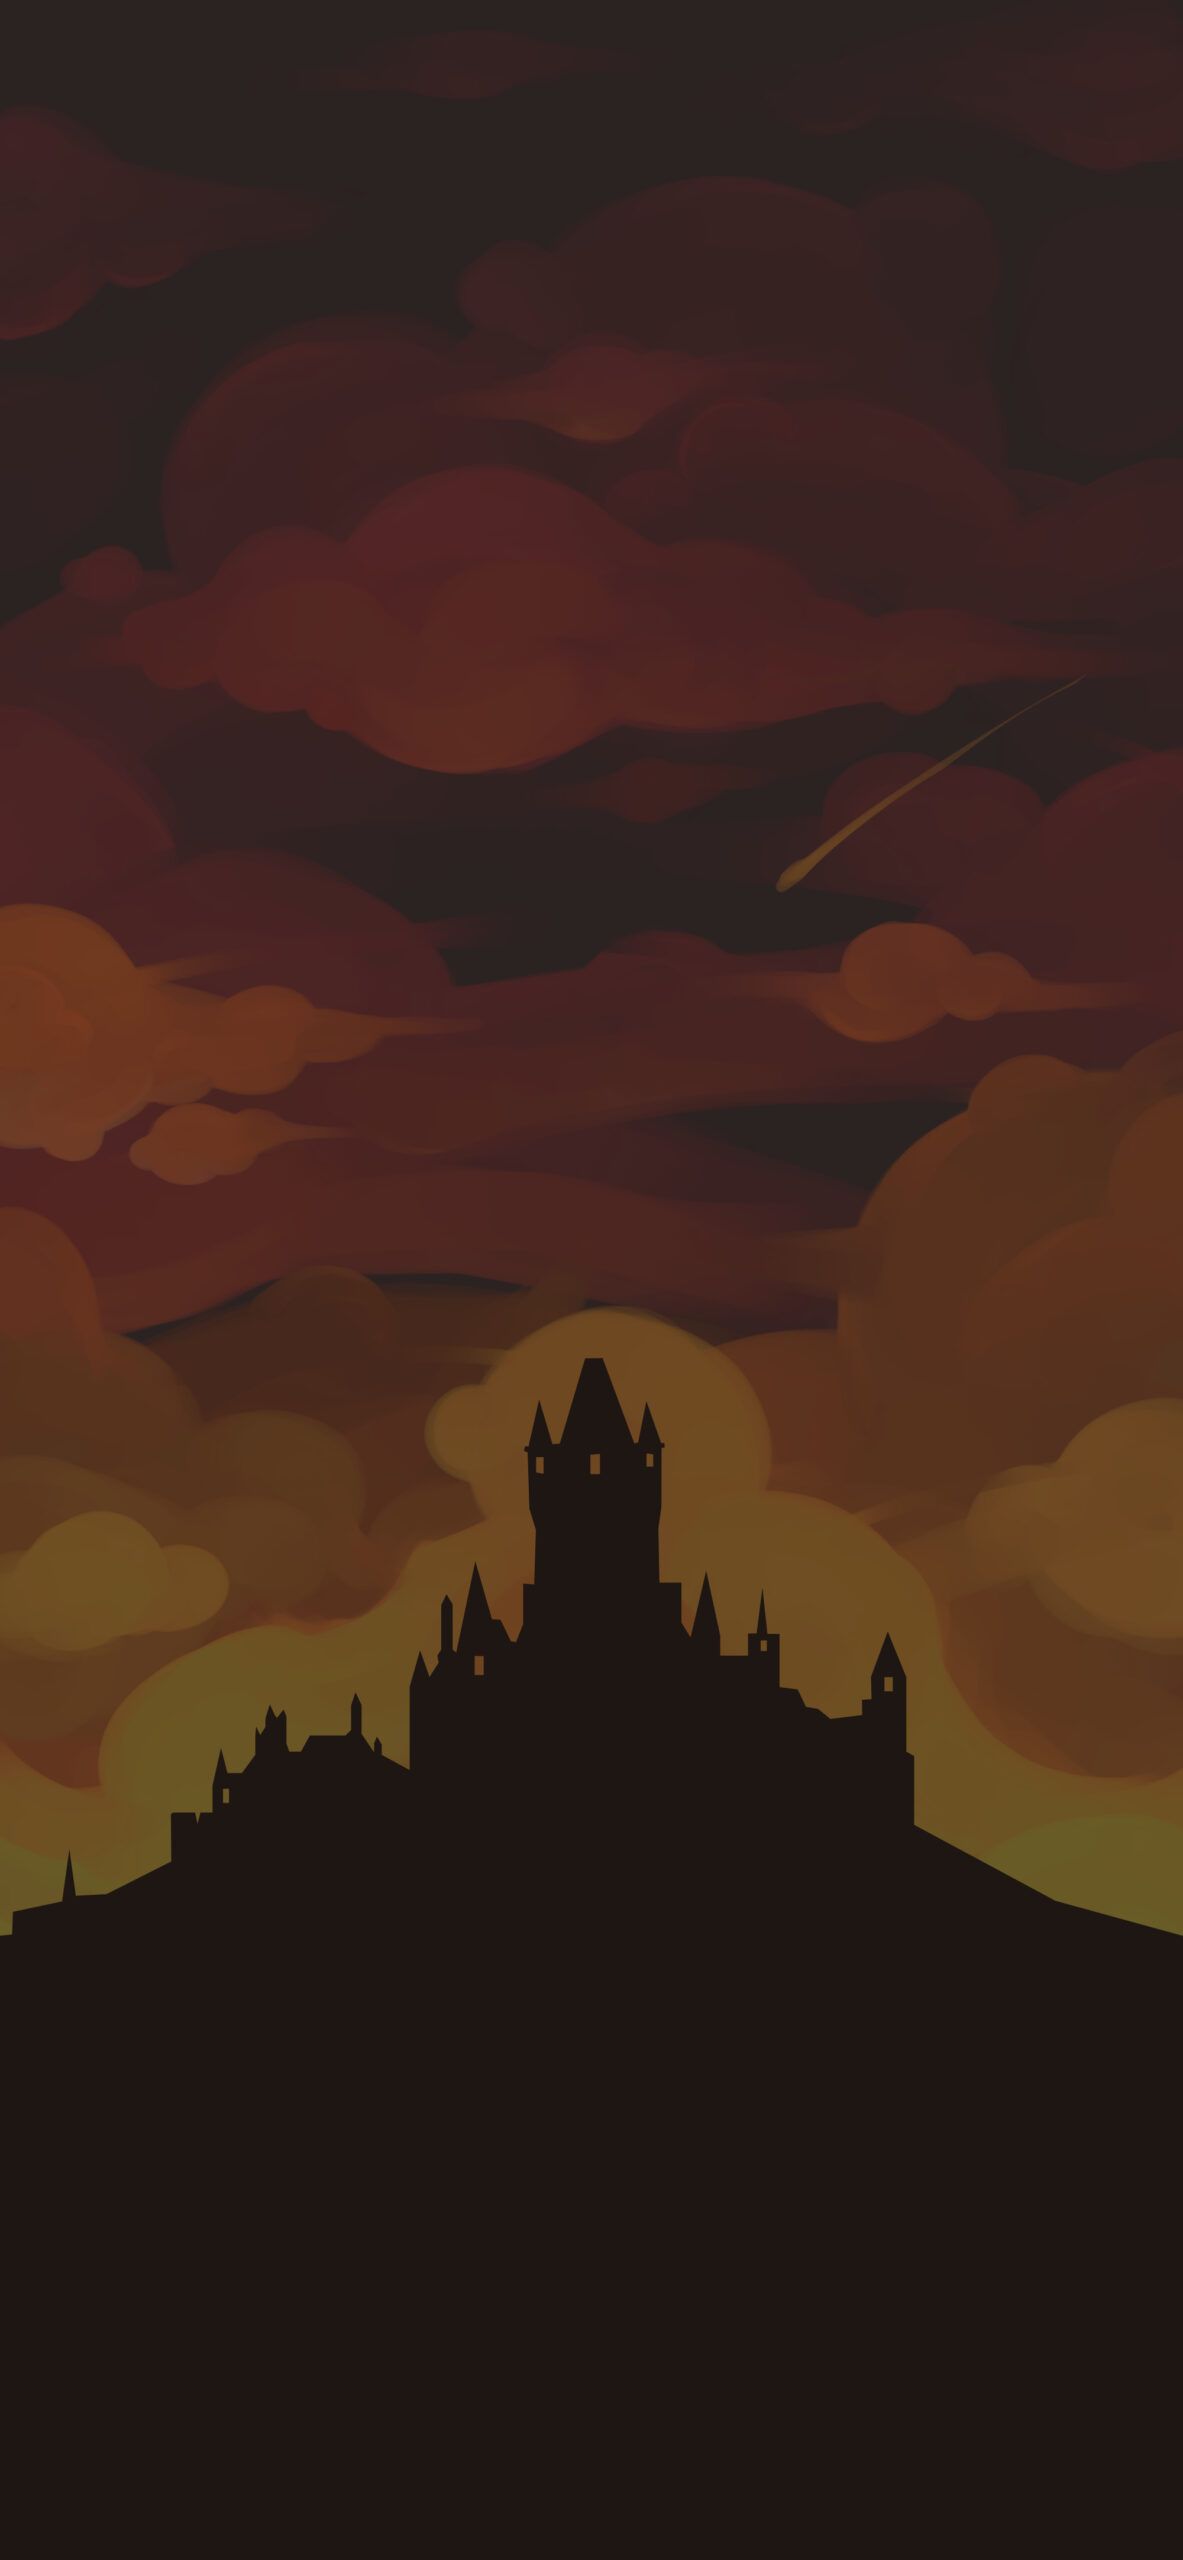 A silhouette of the castle at sunset - Castle